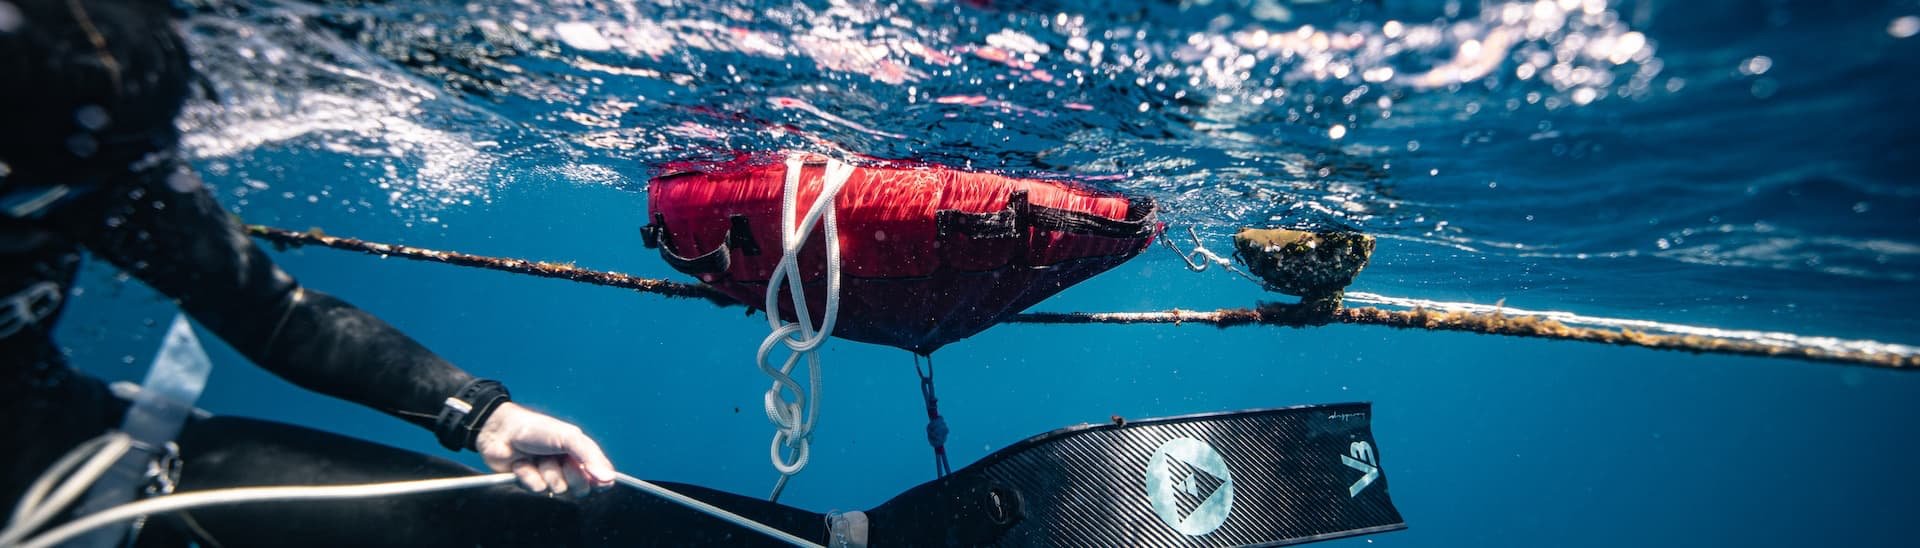 Essential Safety Skills For Freediving